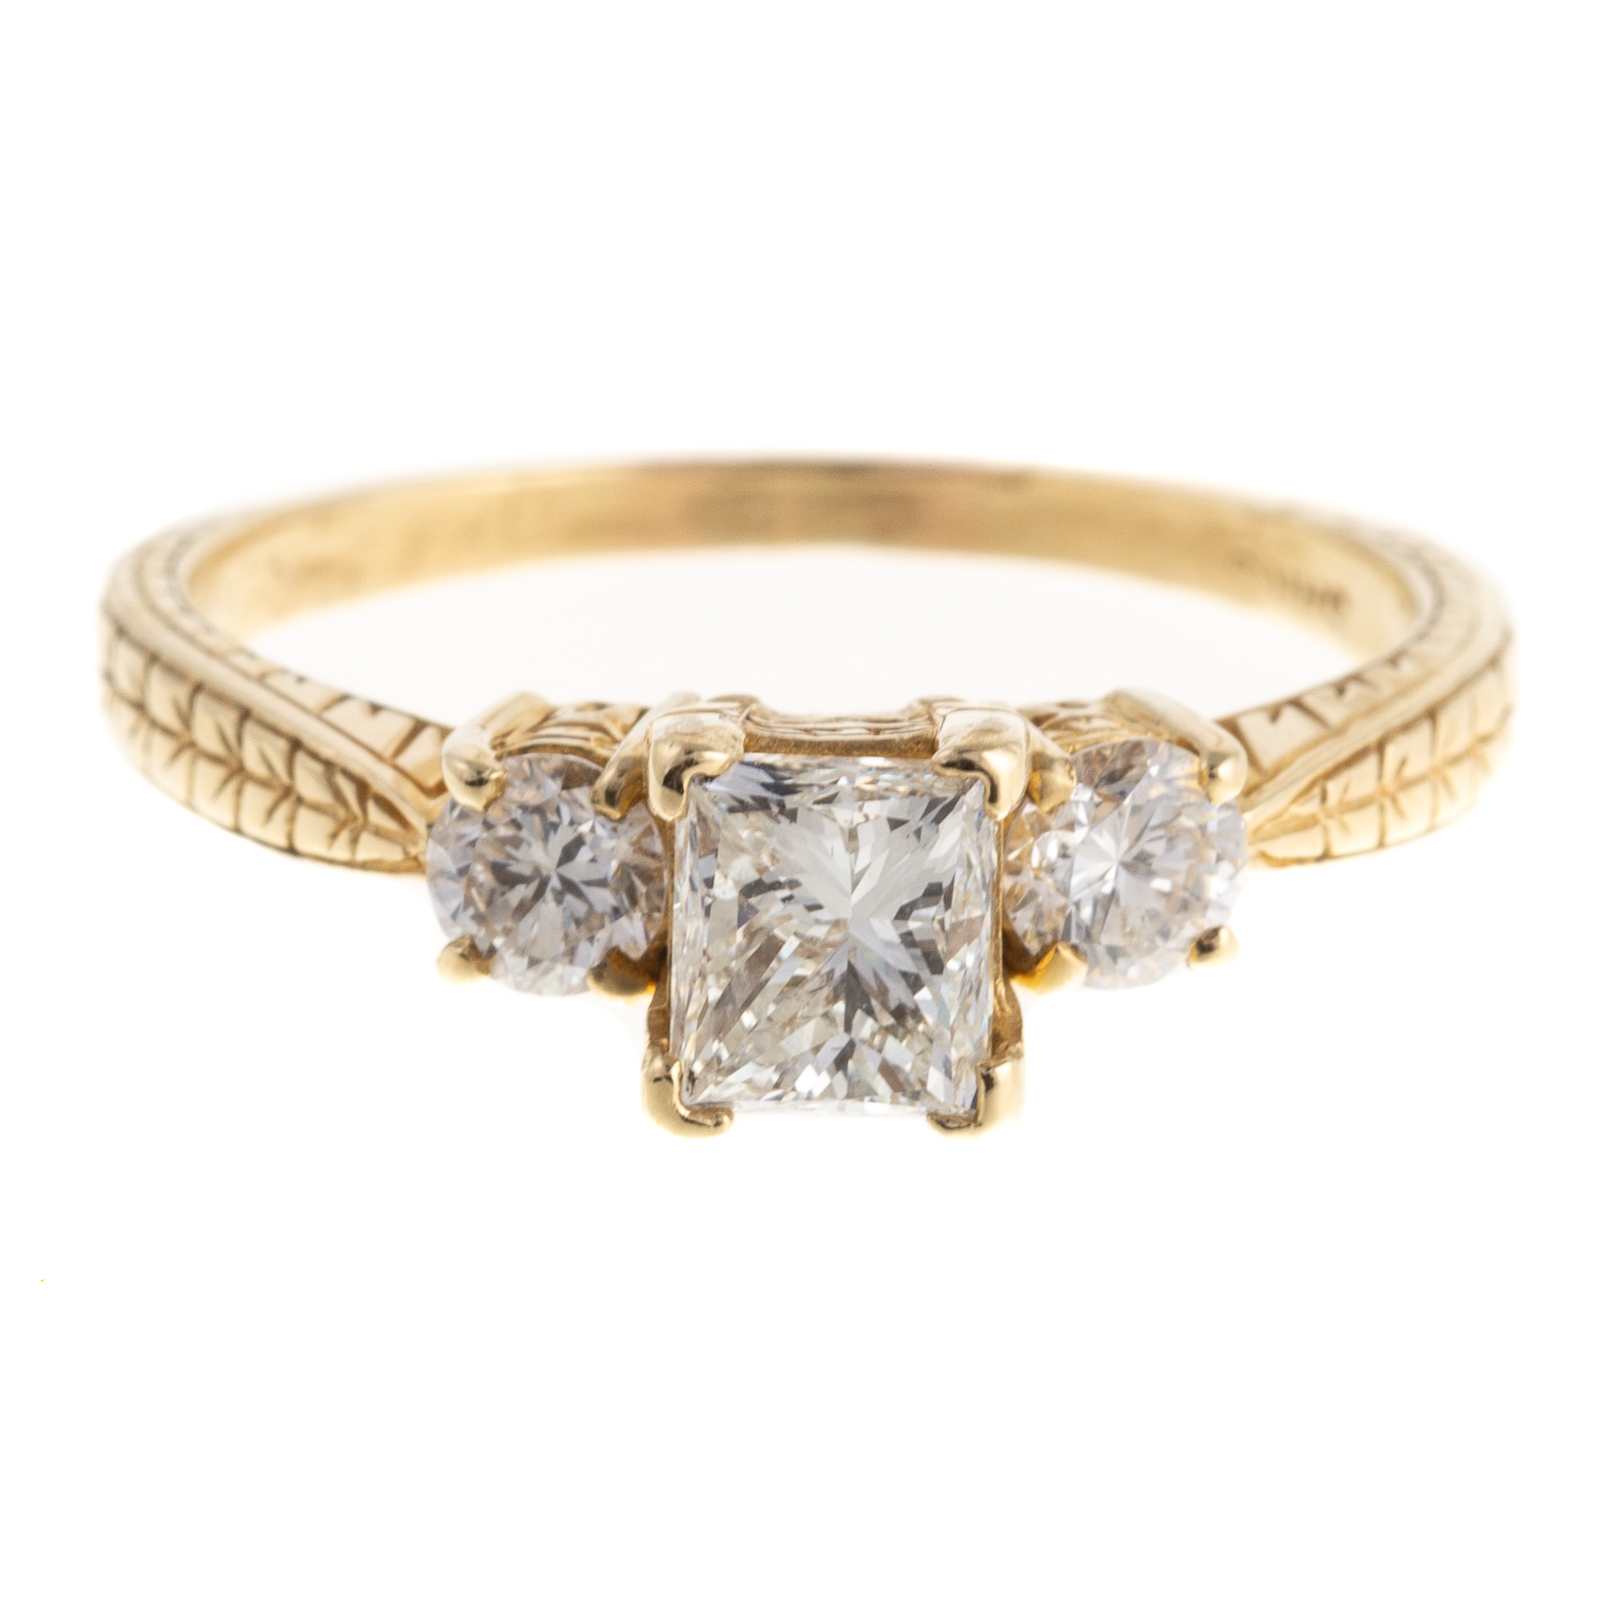 A DIAMOND ENGAGEMENT RING IN 18K